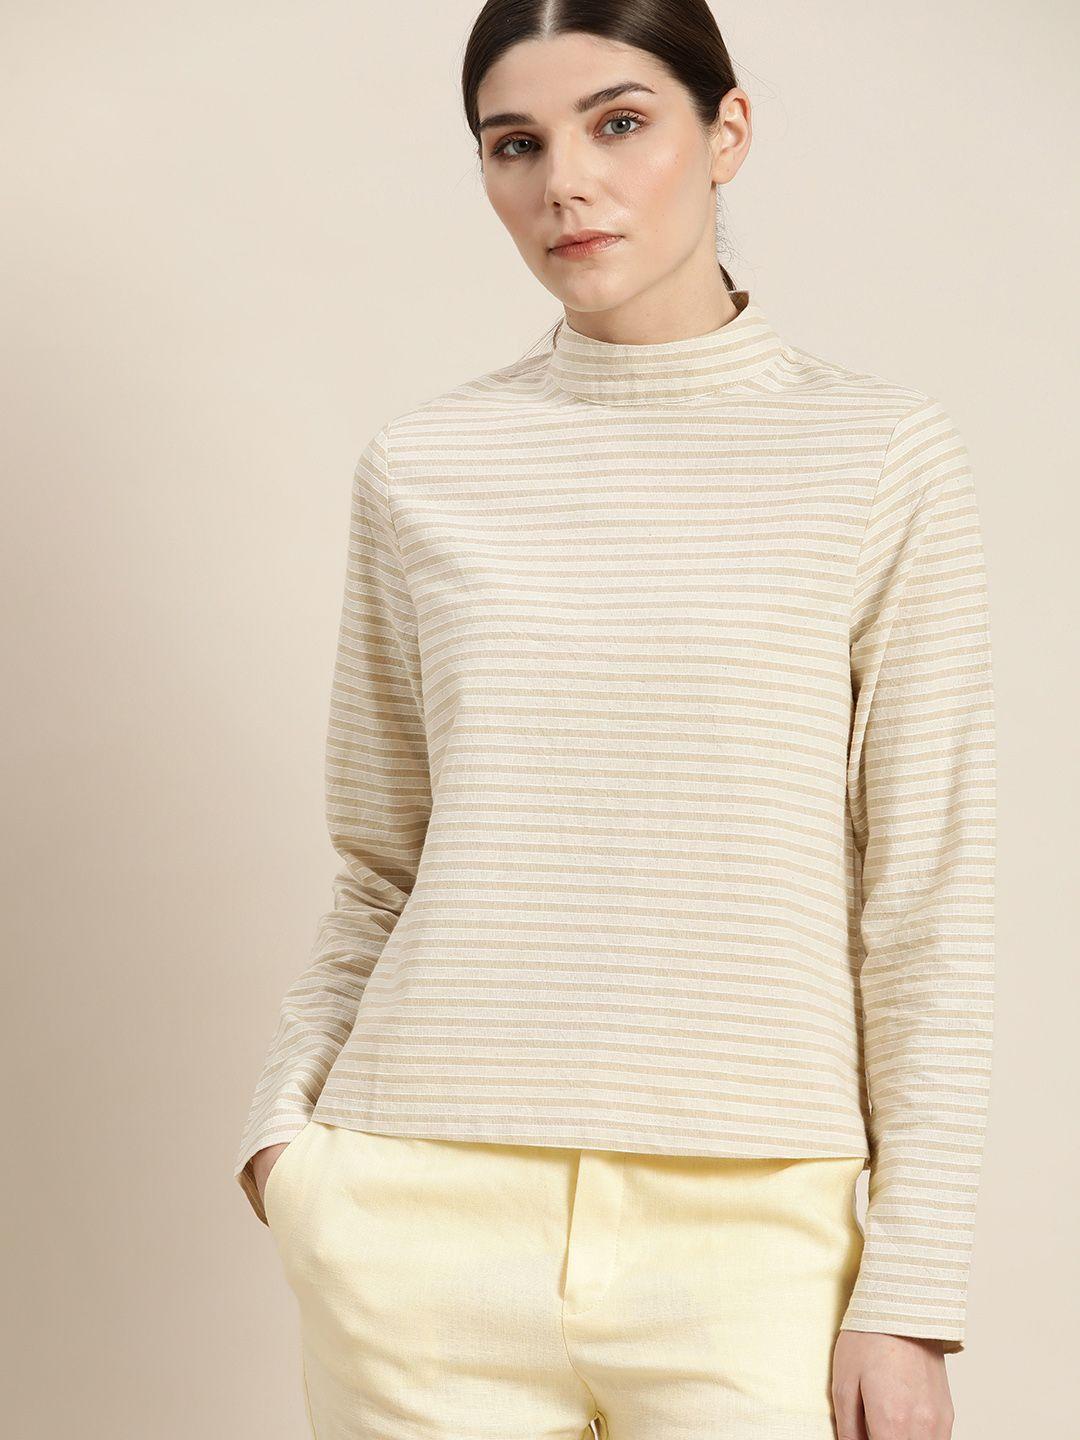 ether kora collection off white & beige striped sustainable unbleached fabric top